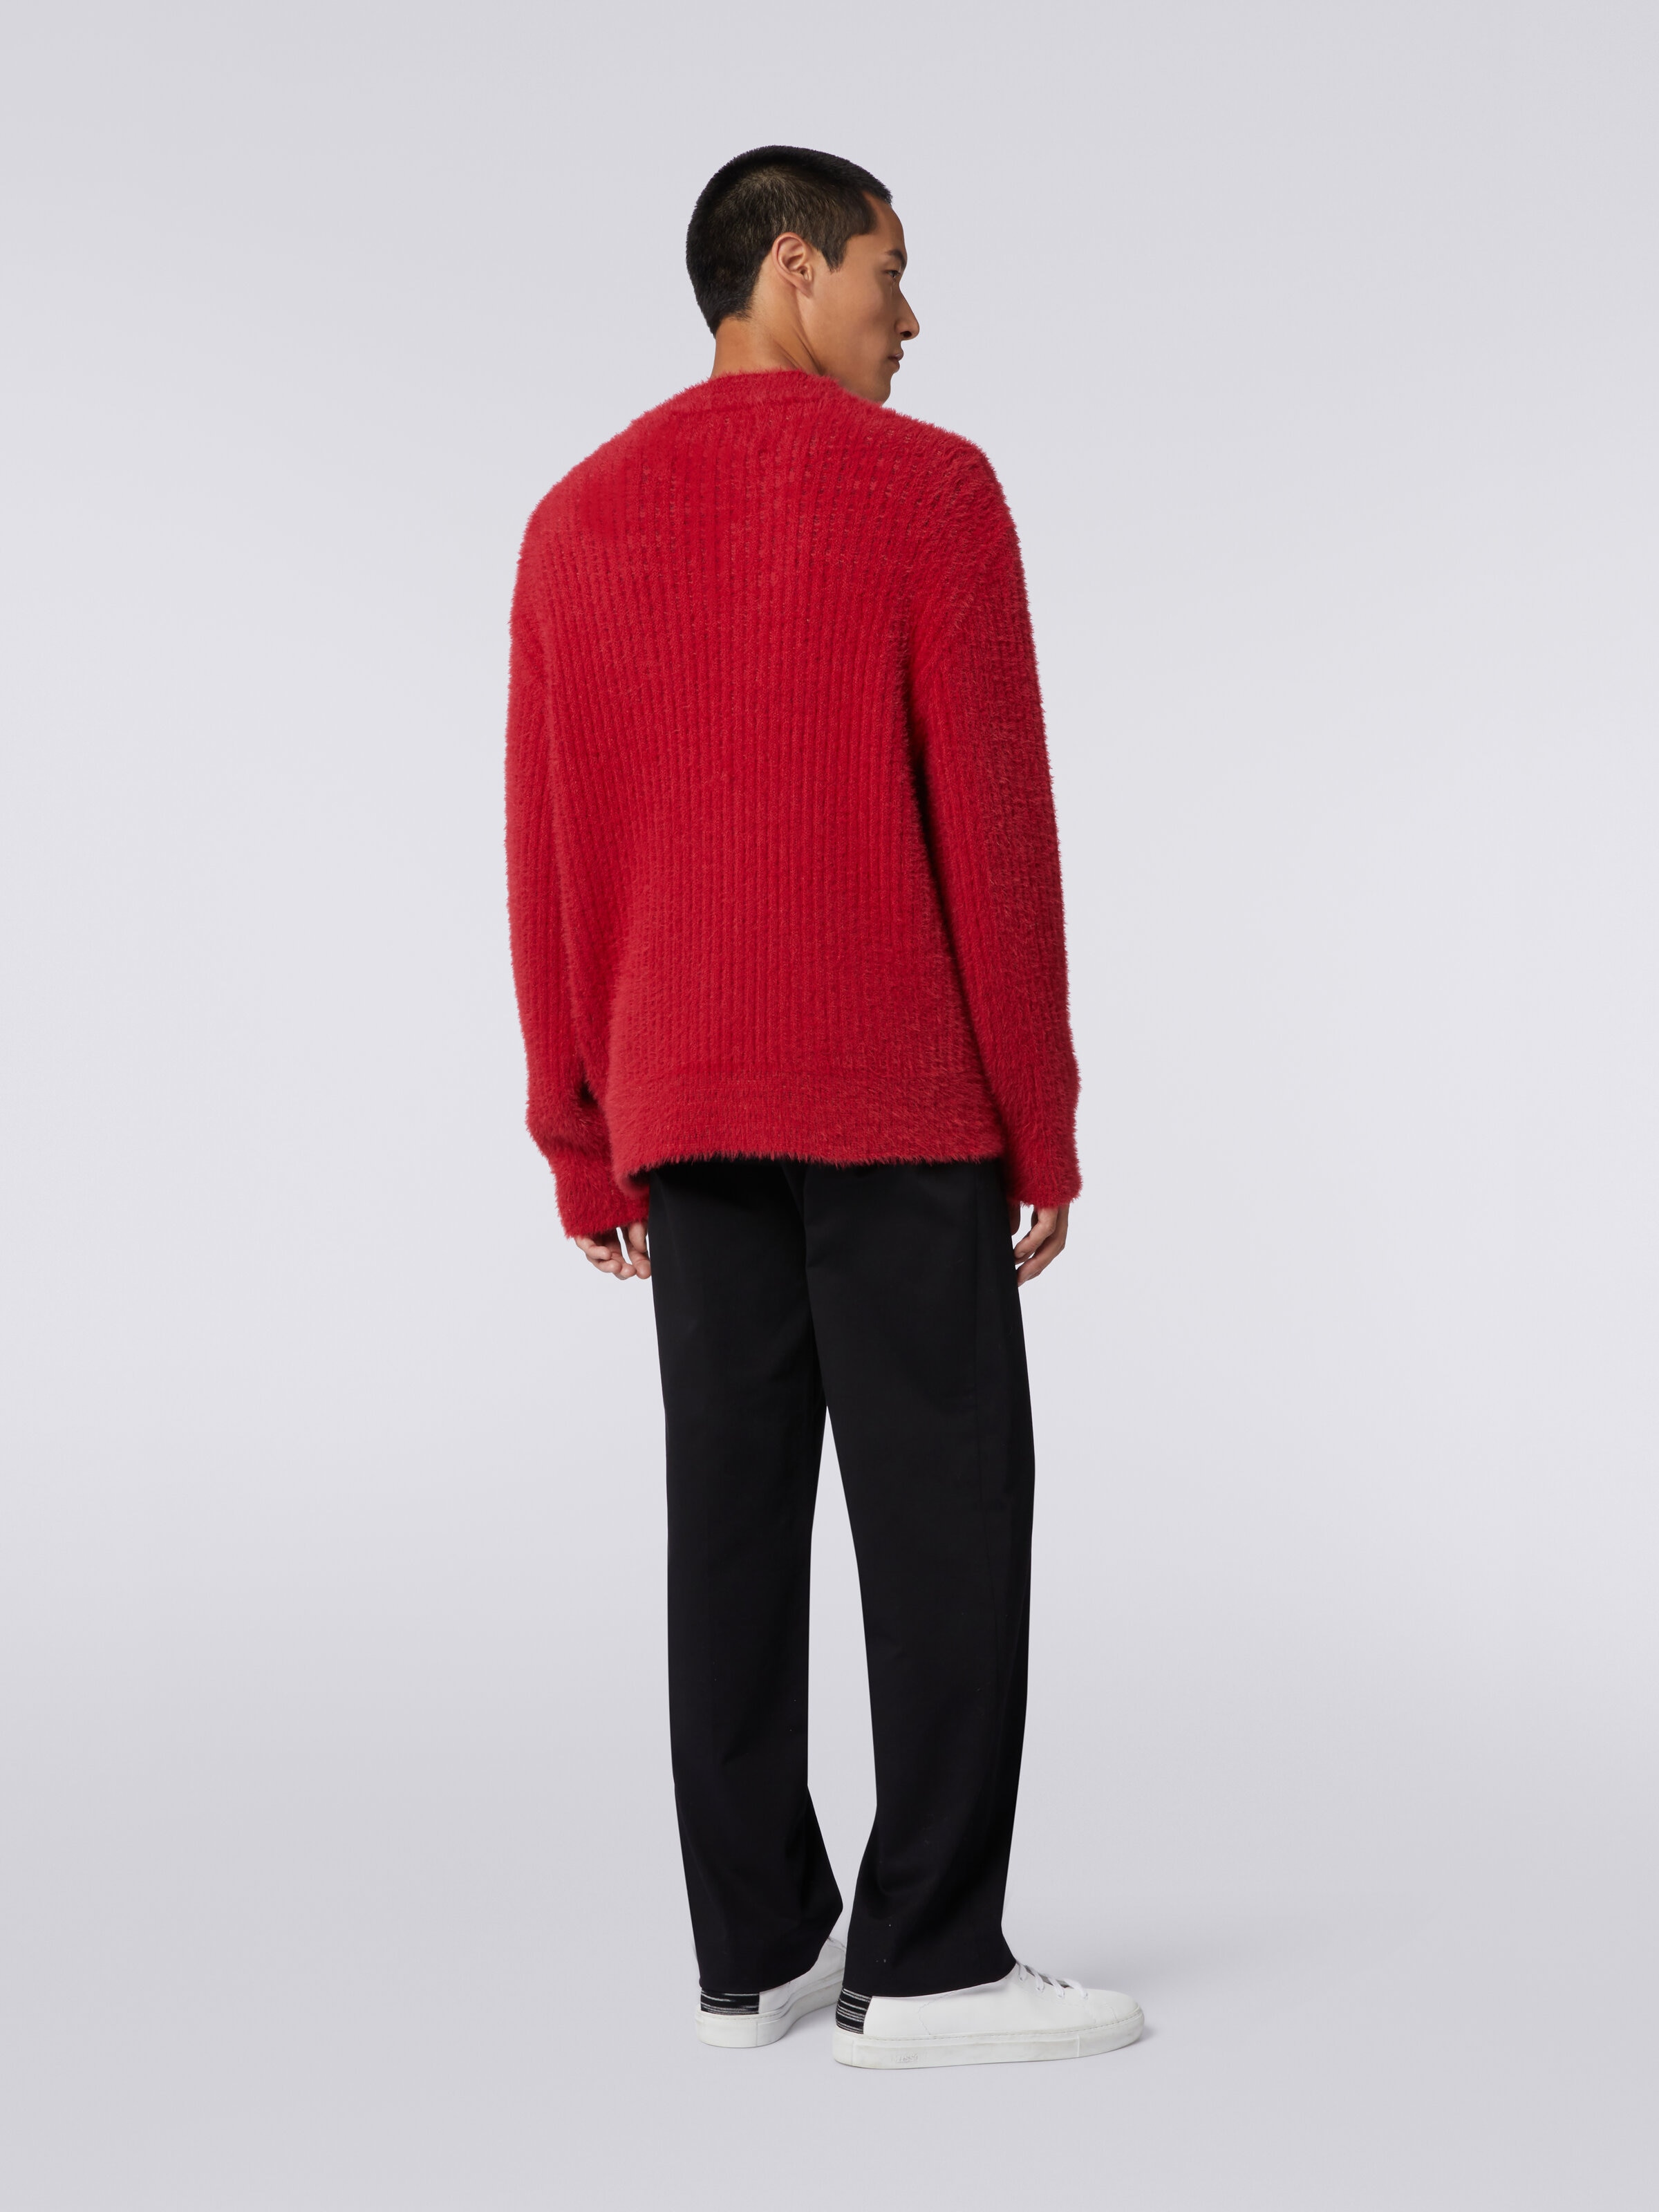 Oversized cardigan in fur-effect wool blend, Red  - 3